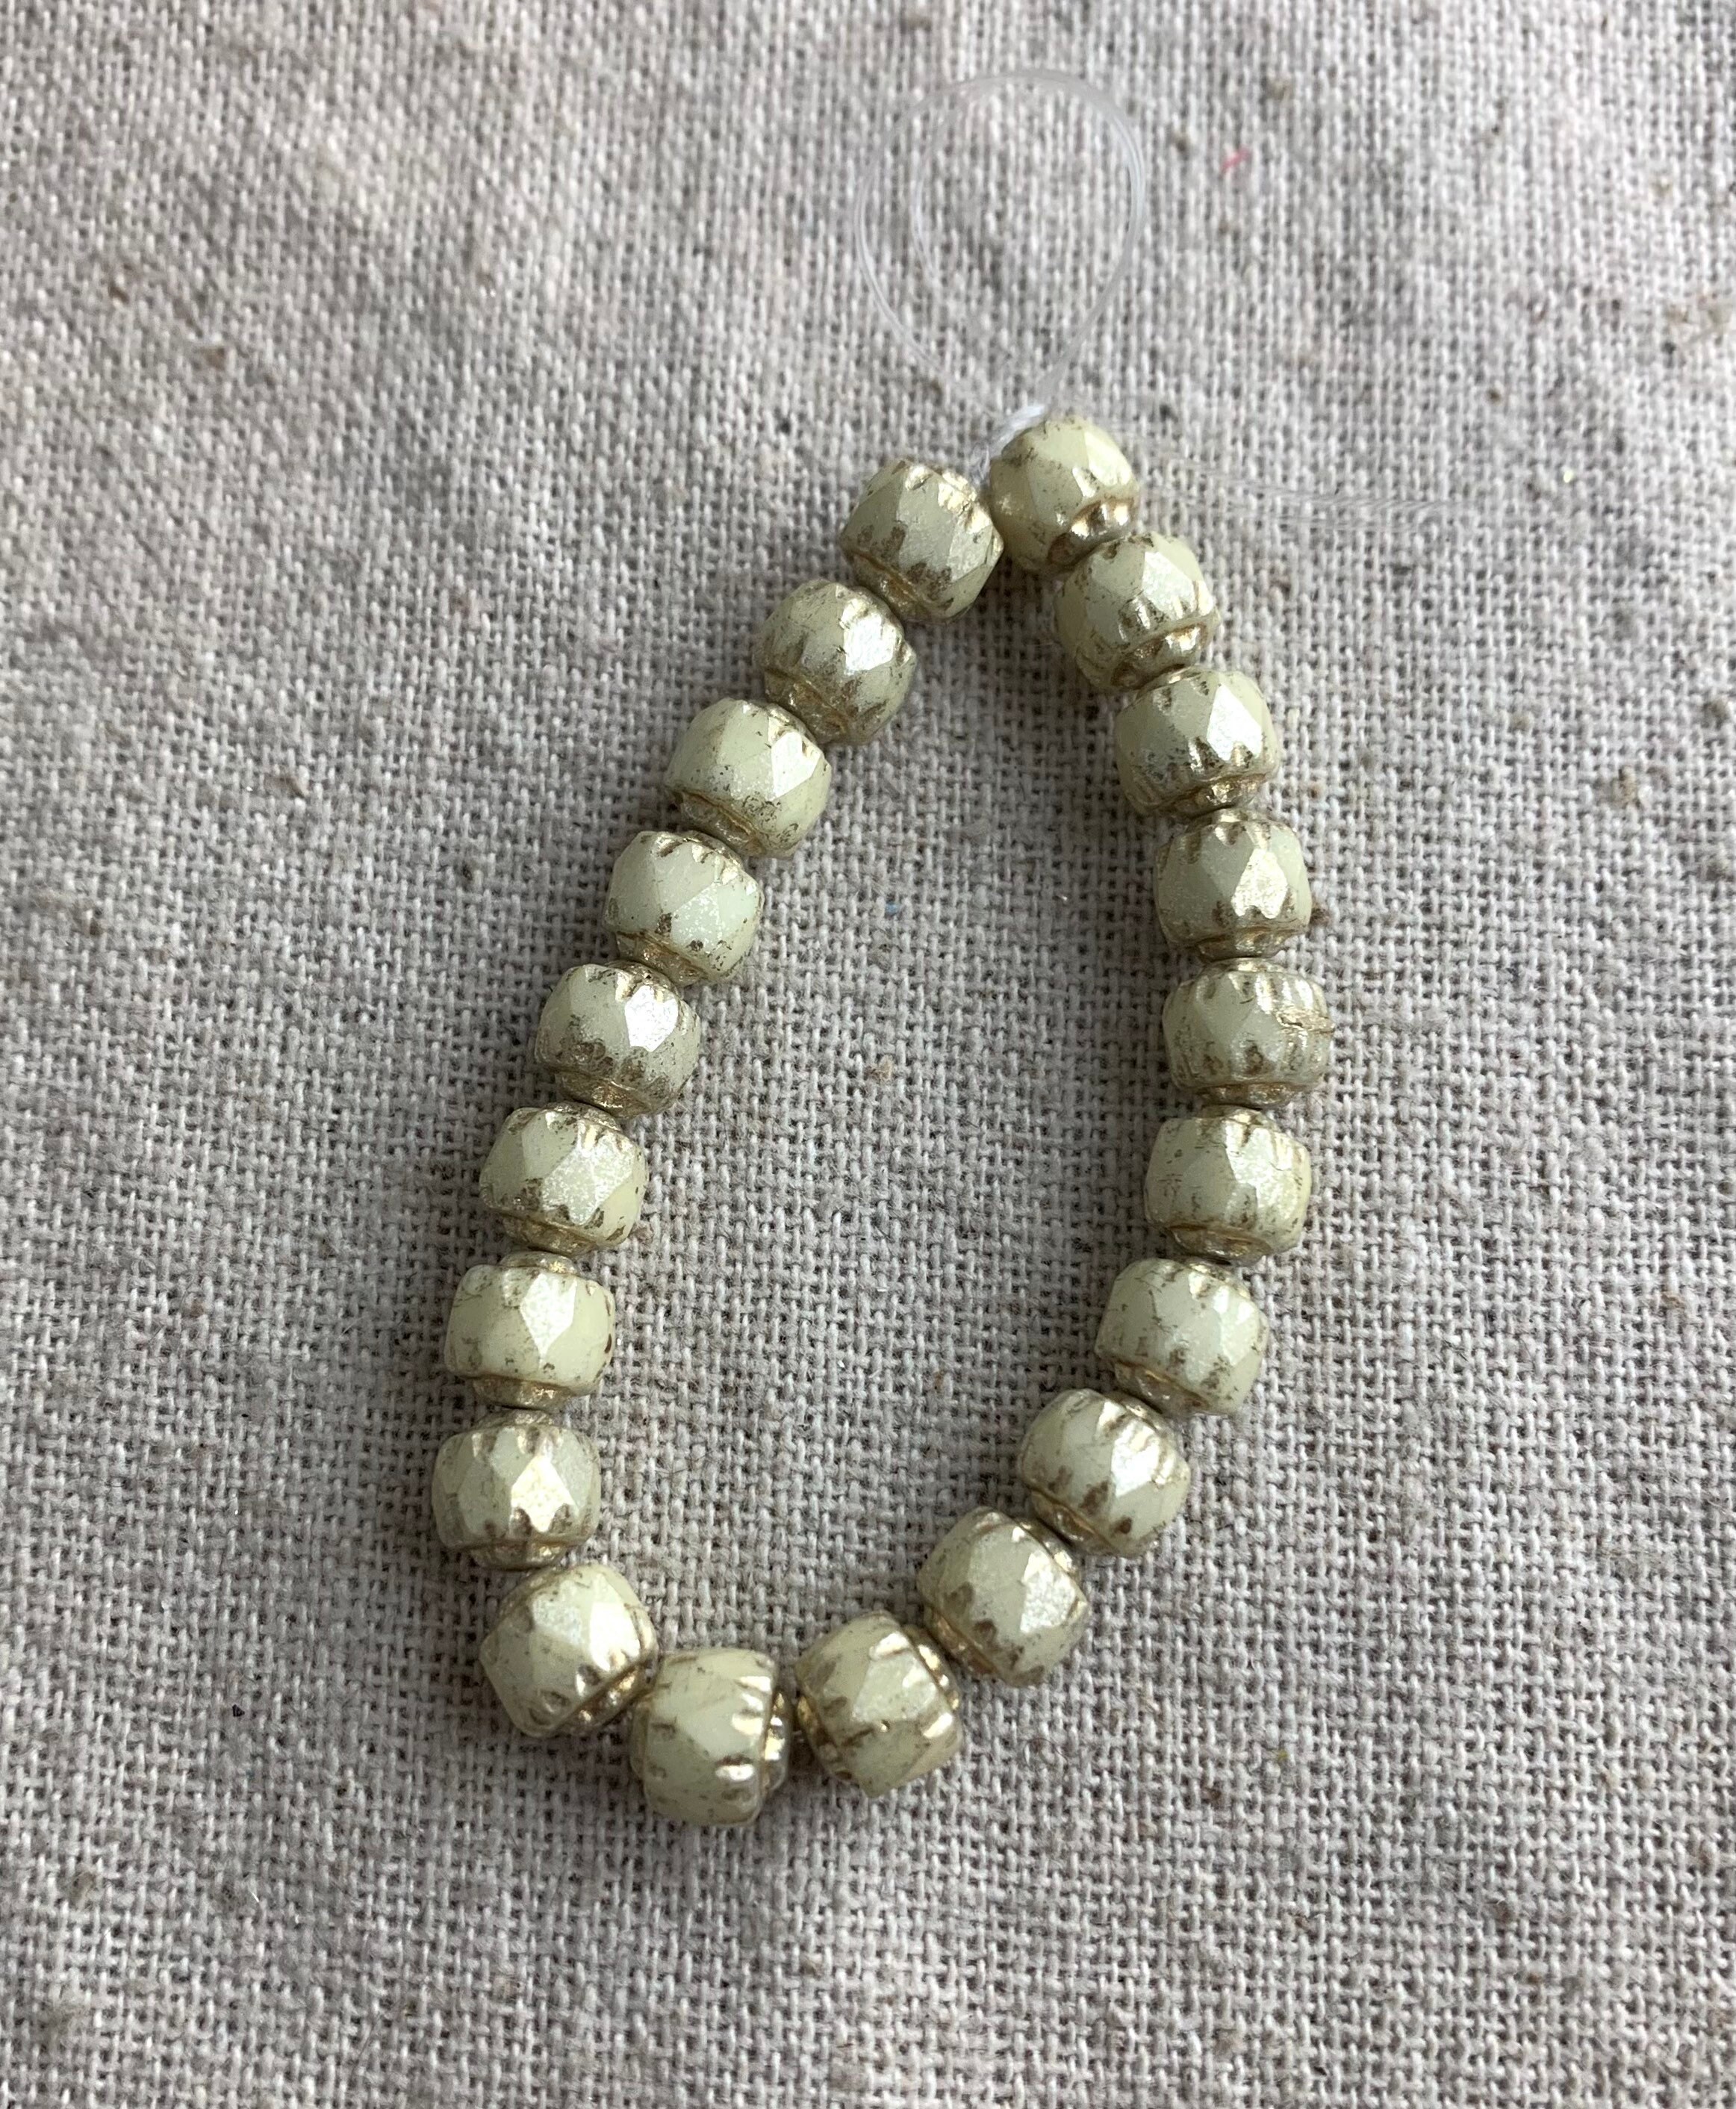 Restocked Fire Polished Faceted Czech Glass Beads 10 Beads 6mm Cathedral Yellow Ivory Luster with a Silver Mercury Finish and a Gold Wash